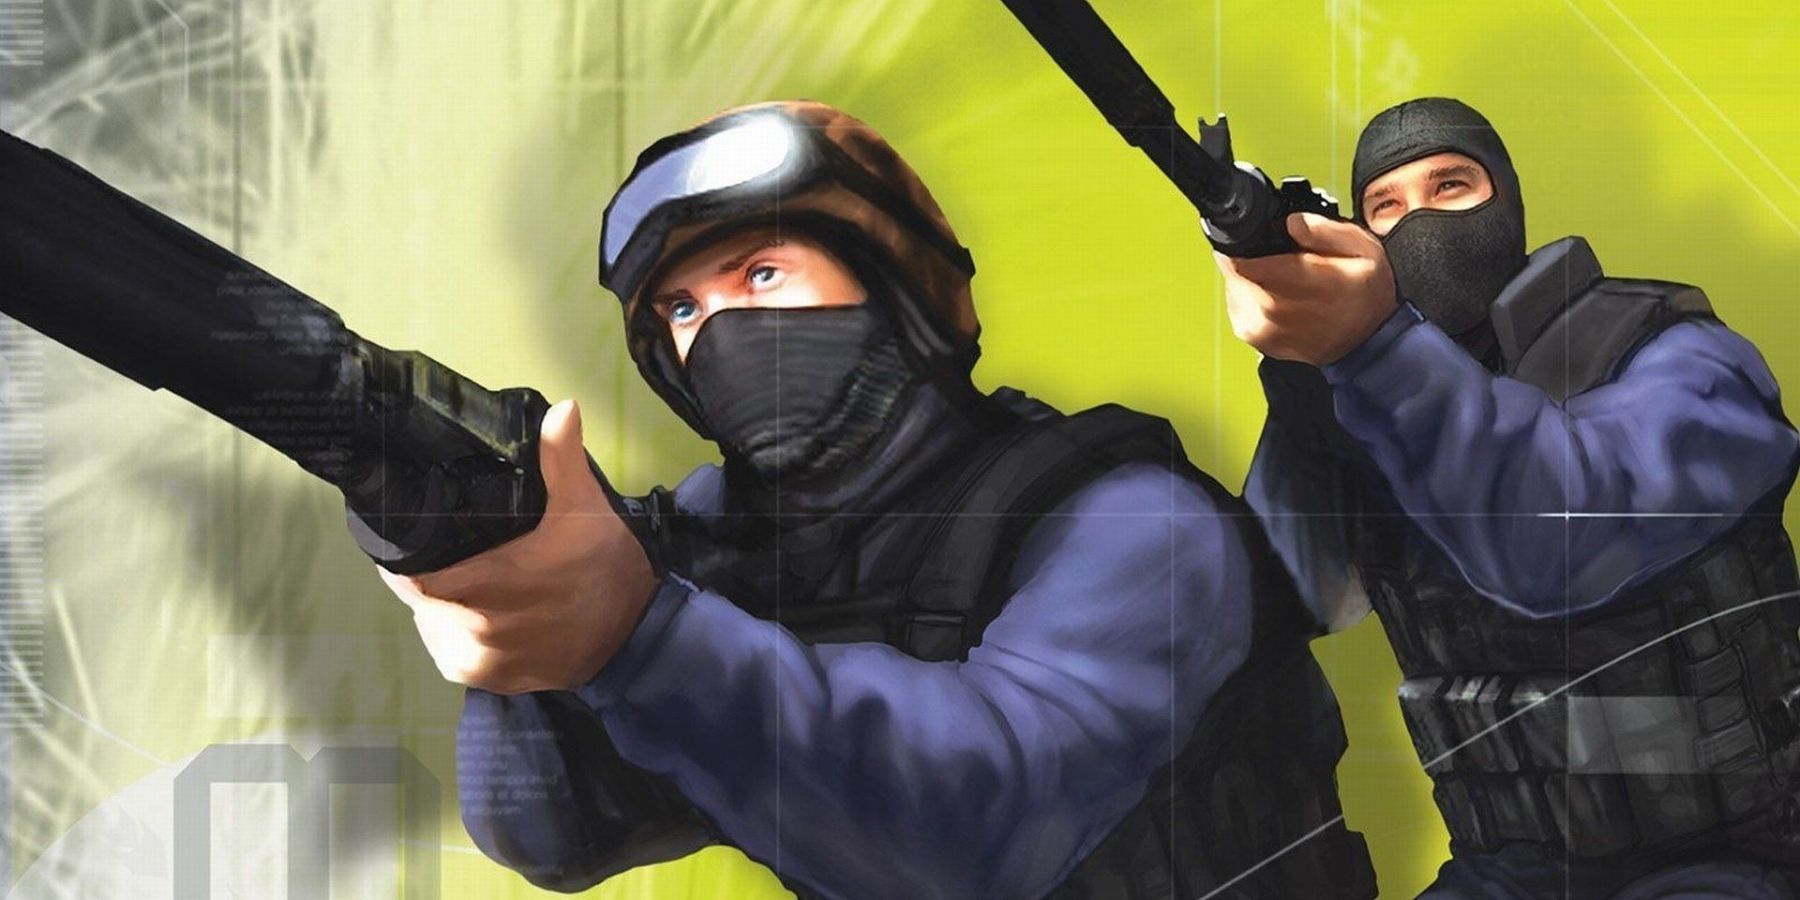 Surprise! Counter-Strike 2 is here, and the limited beta opens